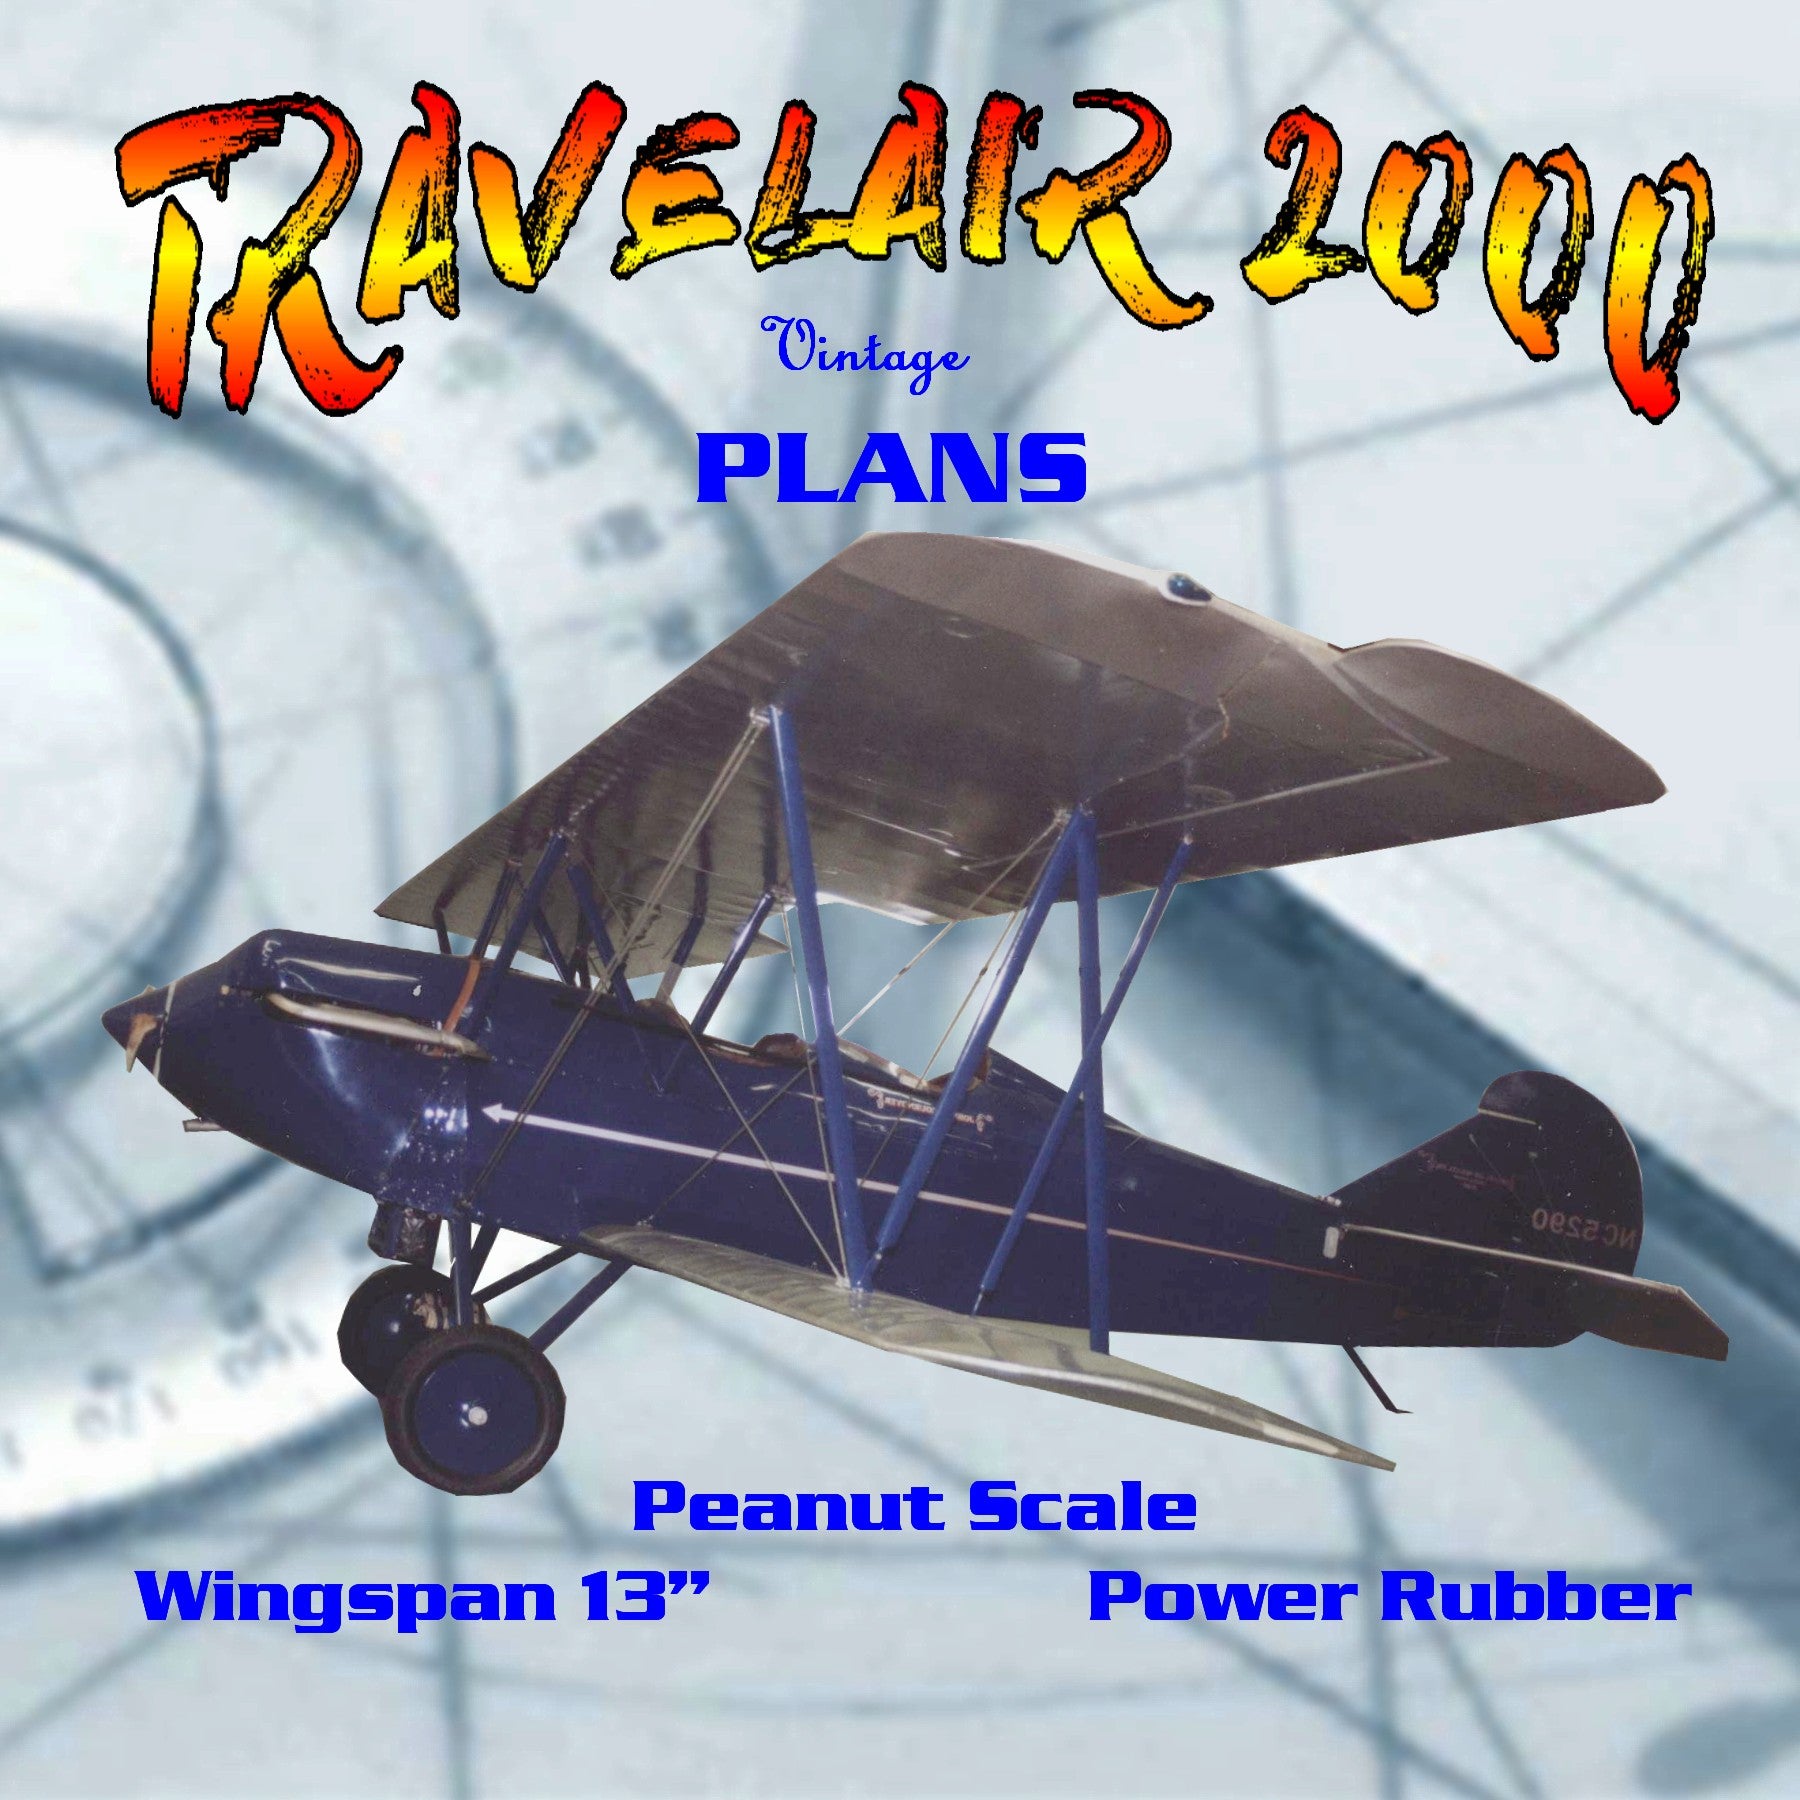 full size printed plans peanut scale "travelair 2000"  built in the usual fashion